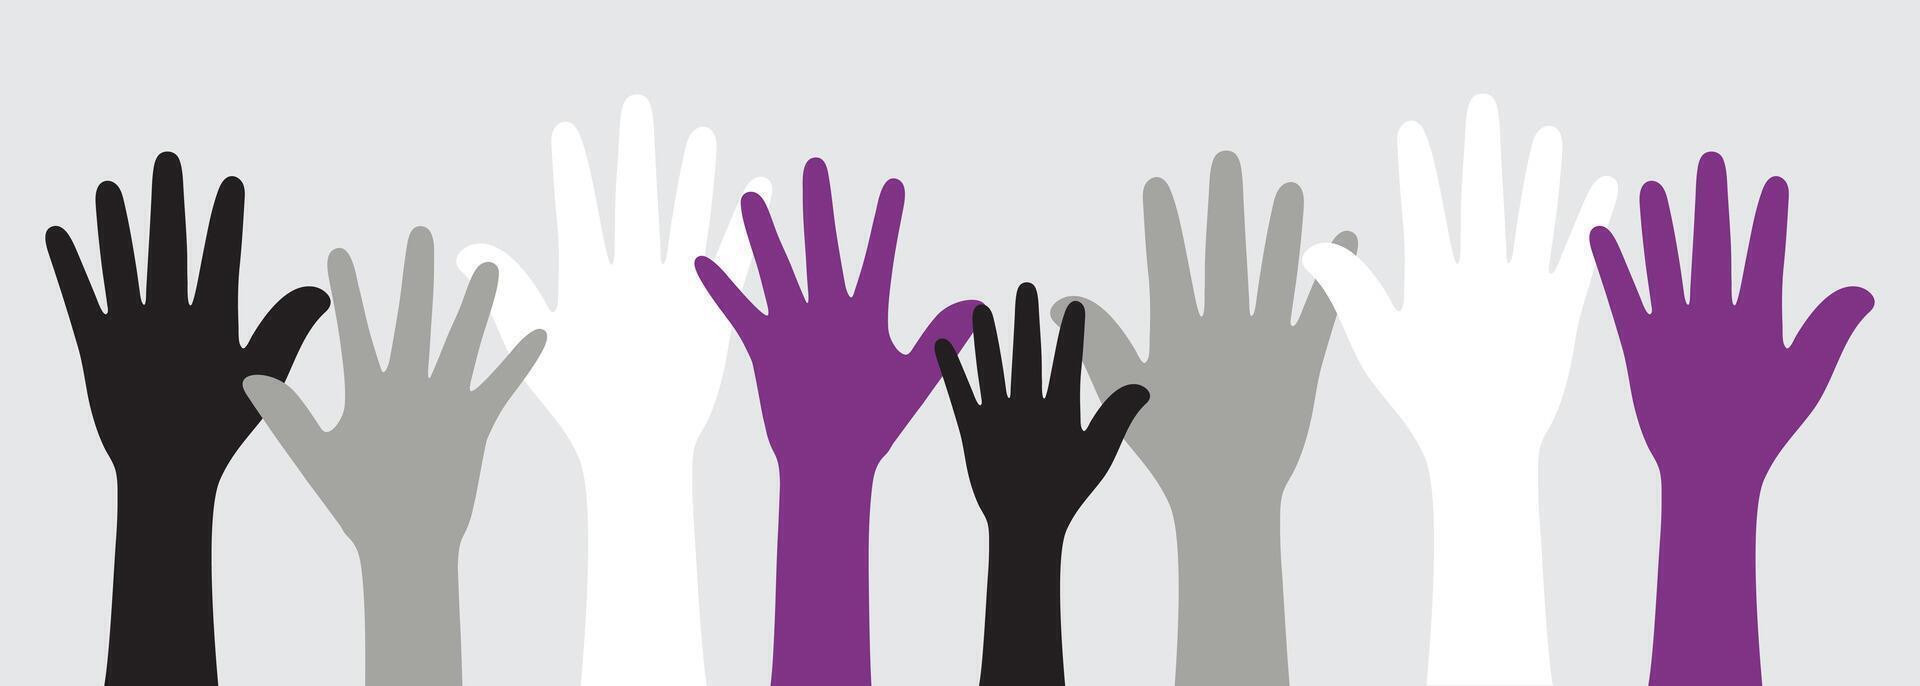 Silhouette of black, grey, white and purple colored hands as the colors of the asexual flag. Flat design illustration. vector